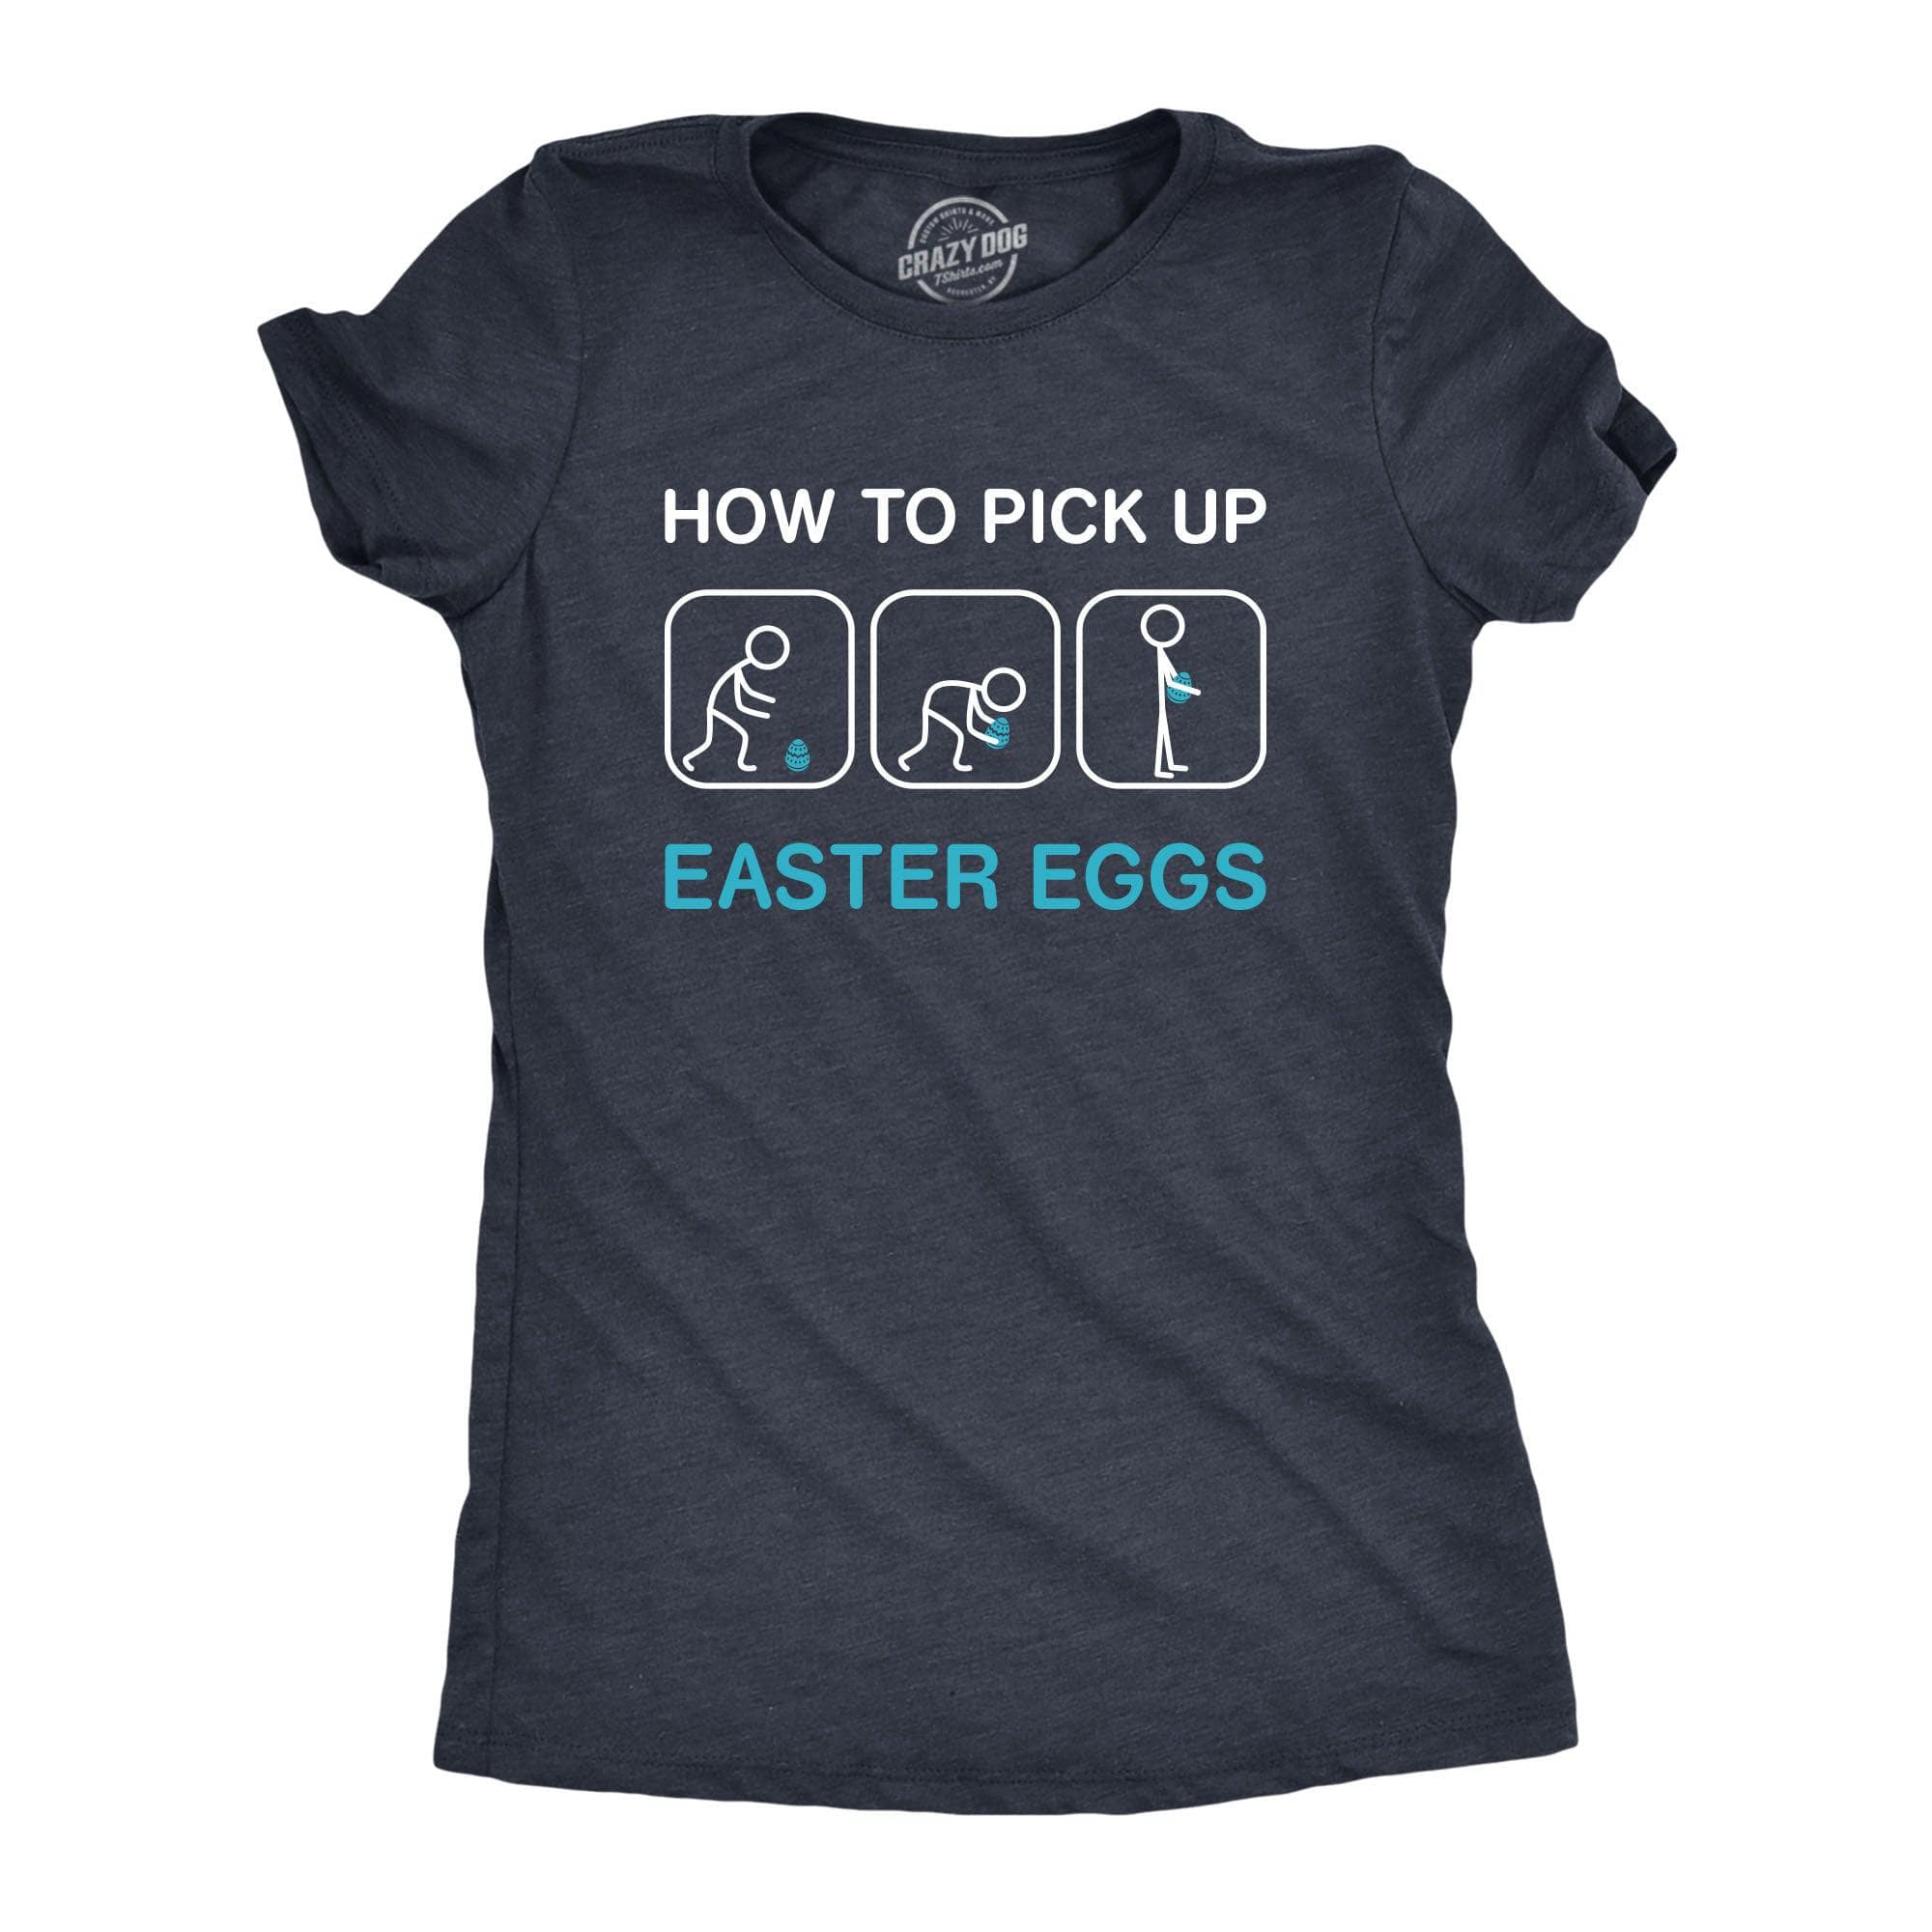 How To Pick Up Easter Eggs Women's Tshirt  -  Crazy Dog T-Shirts